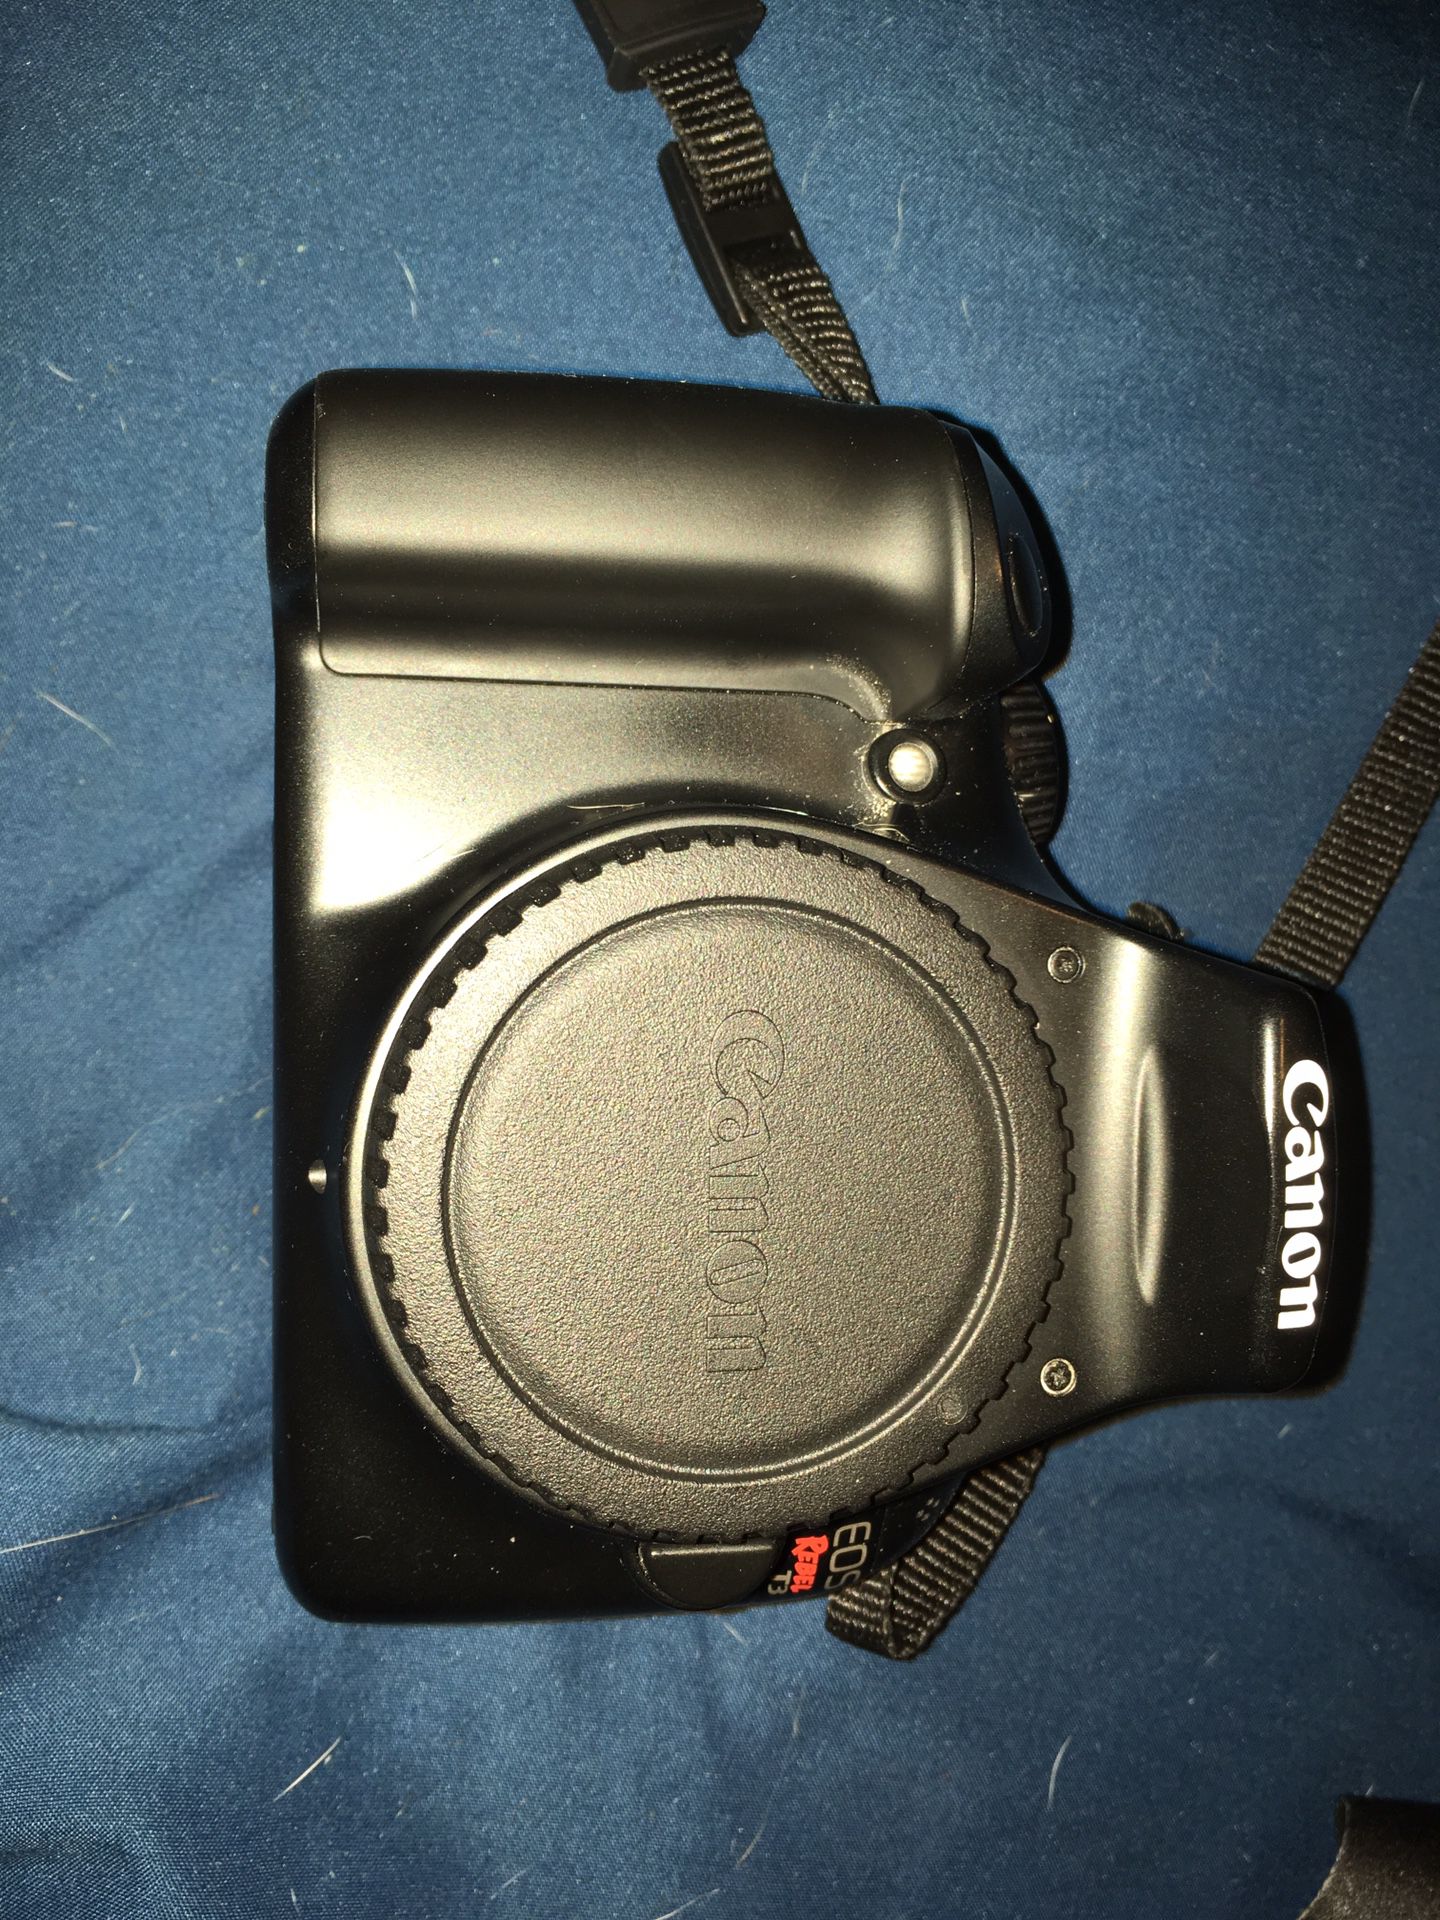 Canon rebel t3 with 2 lenses